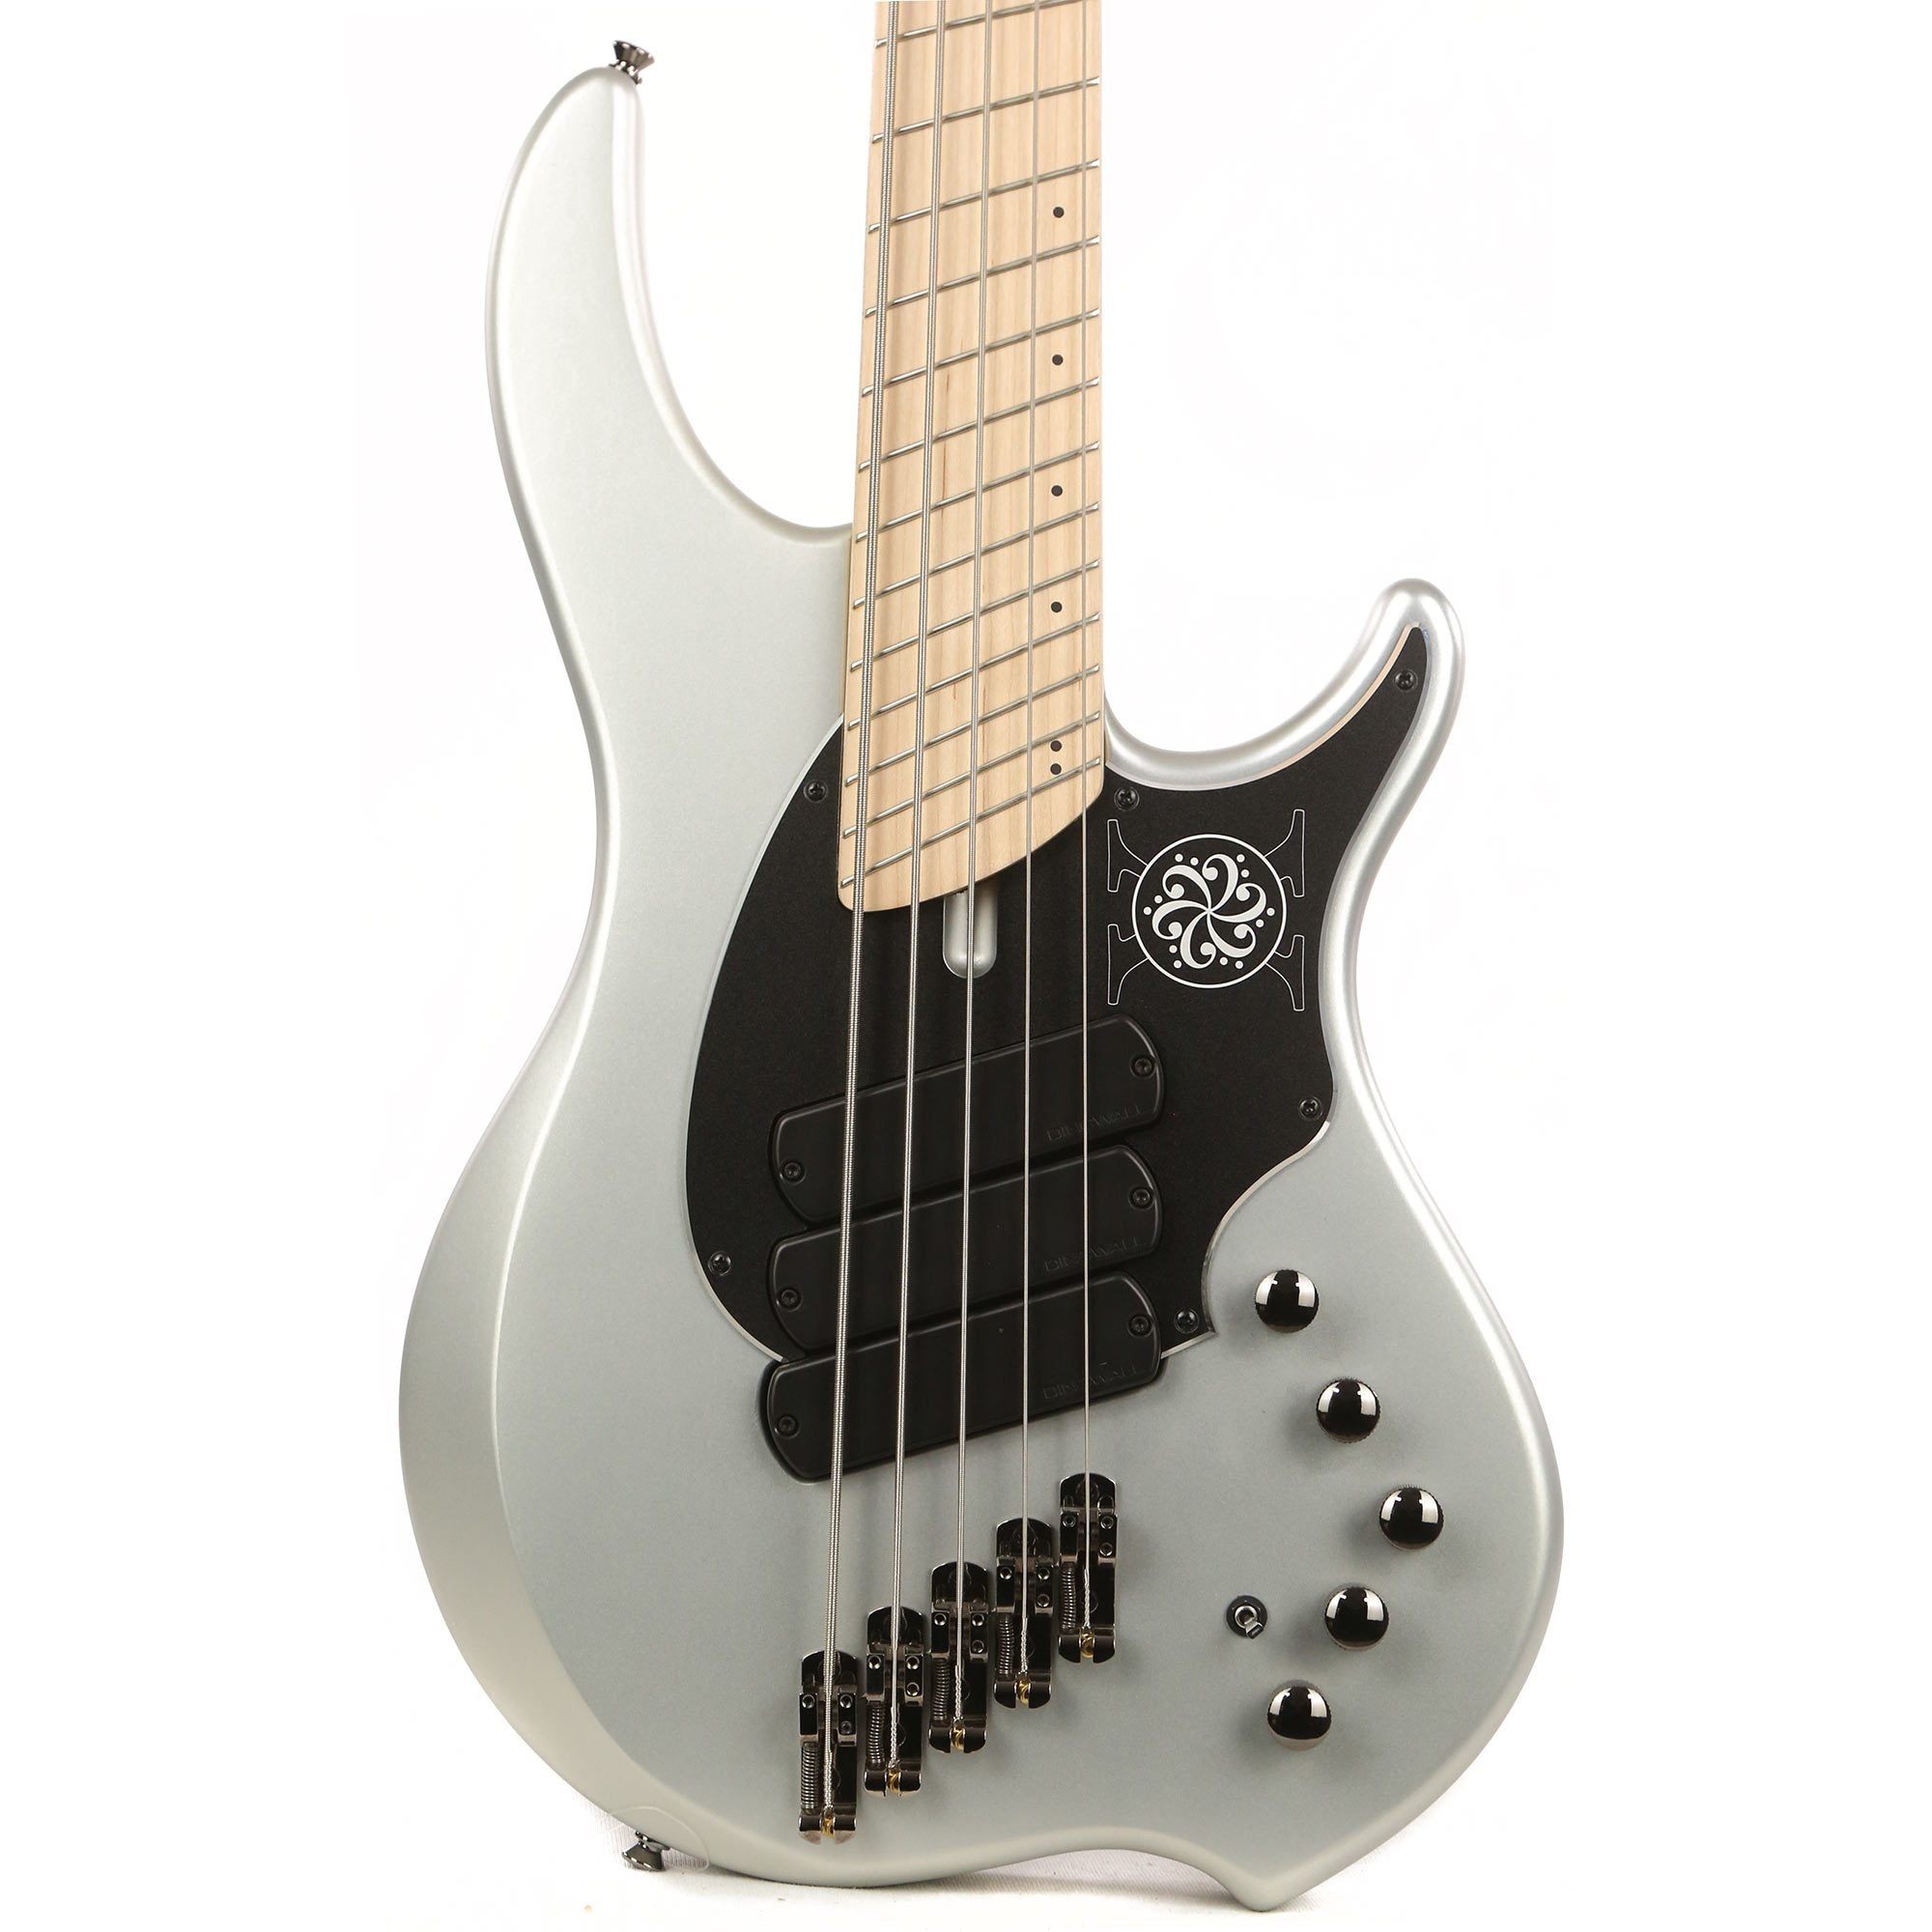 Dingwall NG-3 Bass Darkglass 10th Anniversary Limited Edition 